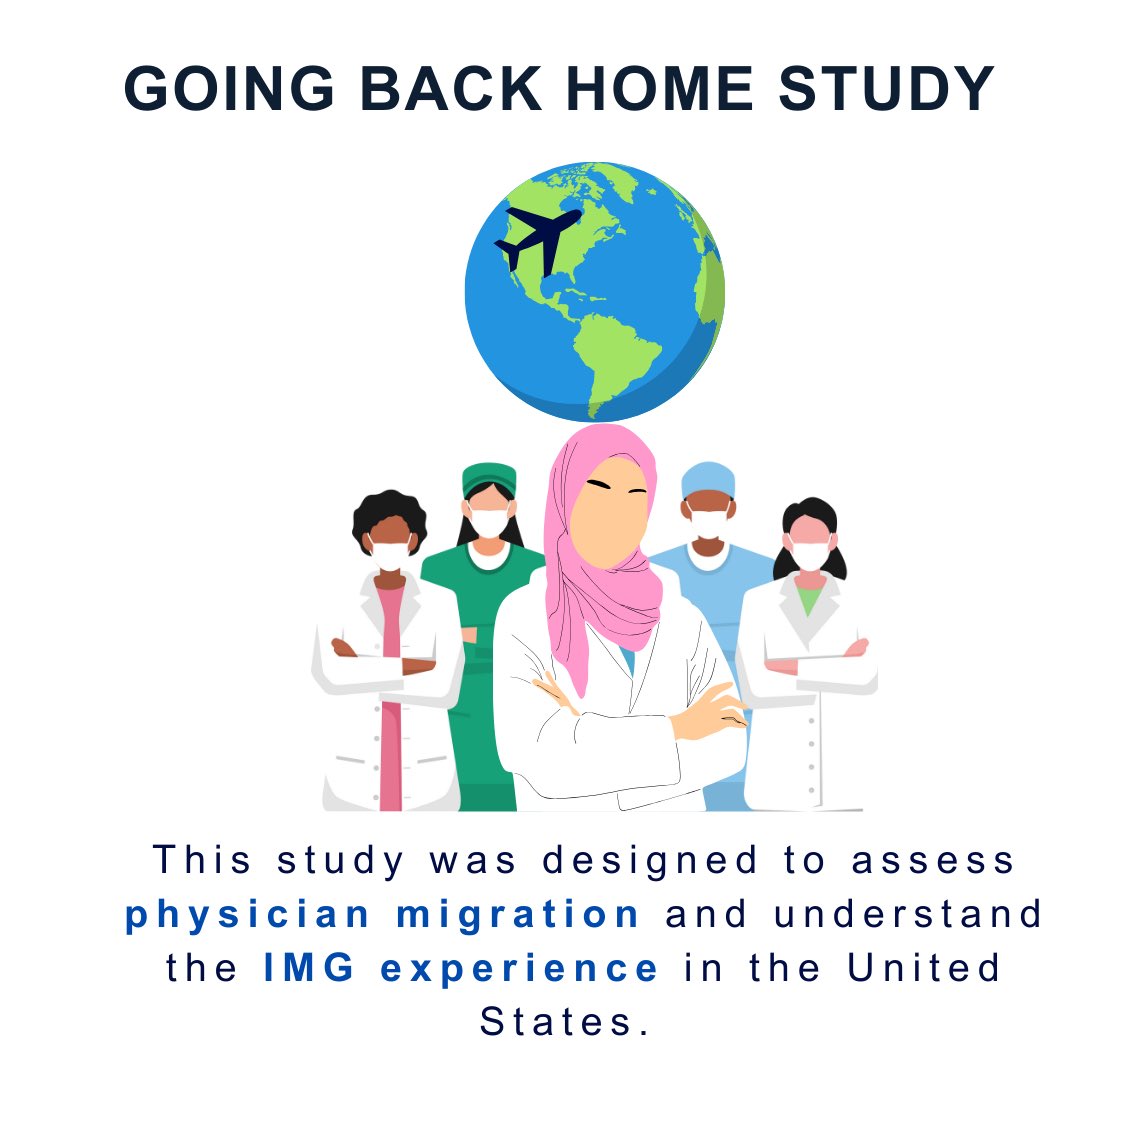 We have collected 78 responses in 24 hours‼️ 📌Are you an IMG or PR Graduate? 📌Have you trained and/or practiced in the 🇺🇸? 📌THE #GoingBackHomeStudy was designed just for you‼️ 📌This survey will take just 10 minutes, DM us Our experiences should be known‼️ @Florez_Lab